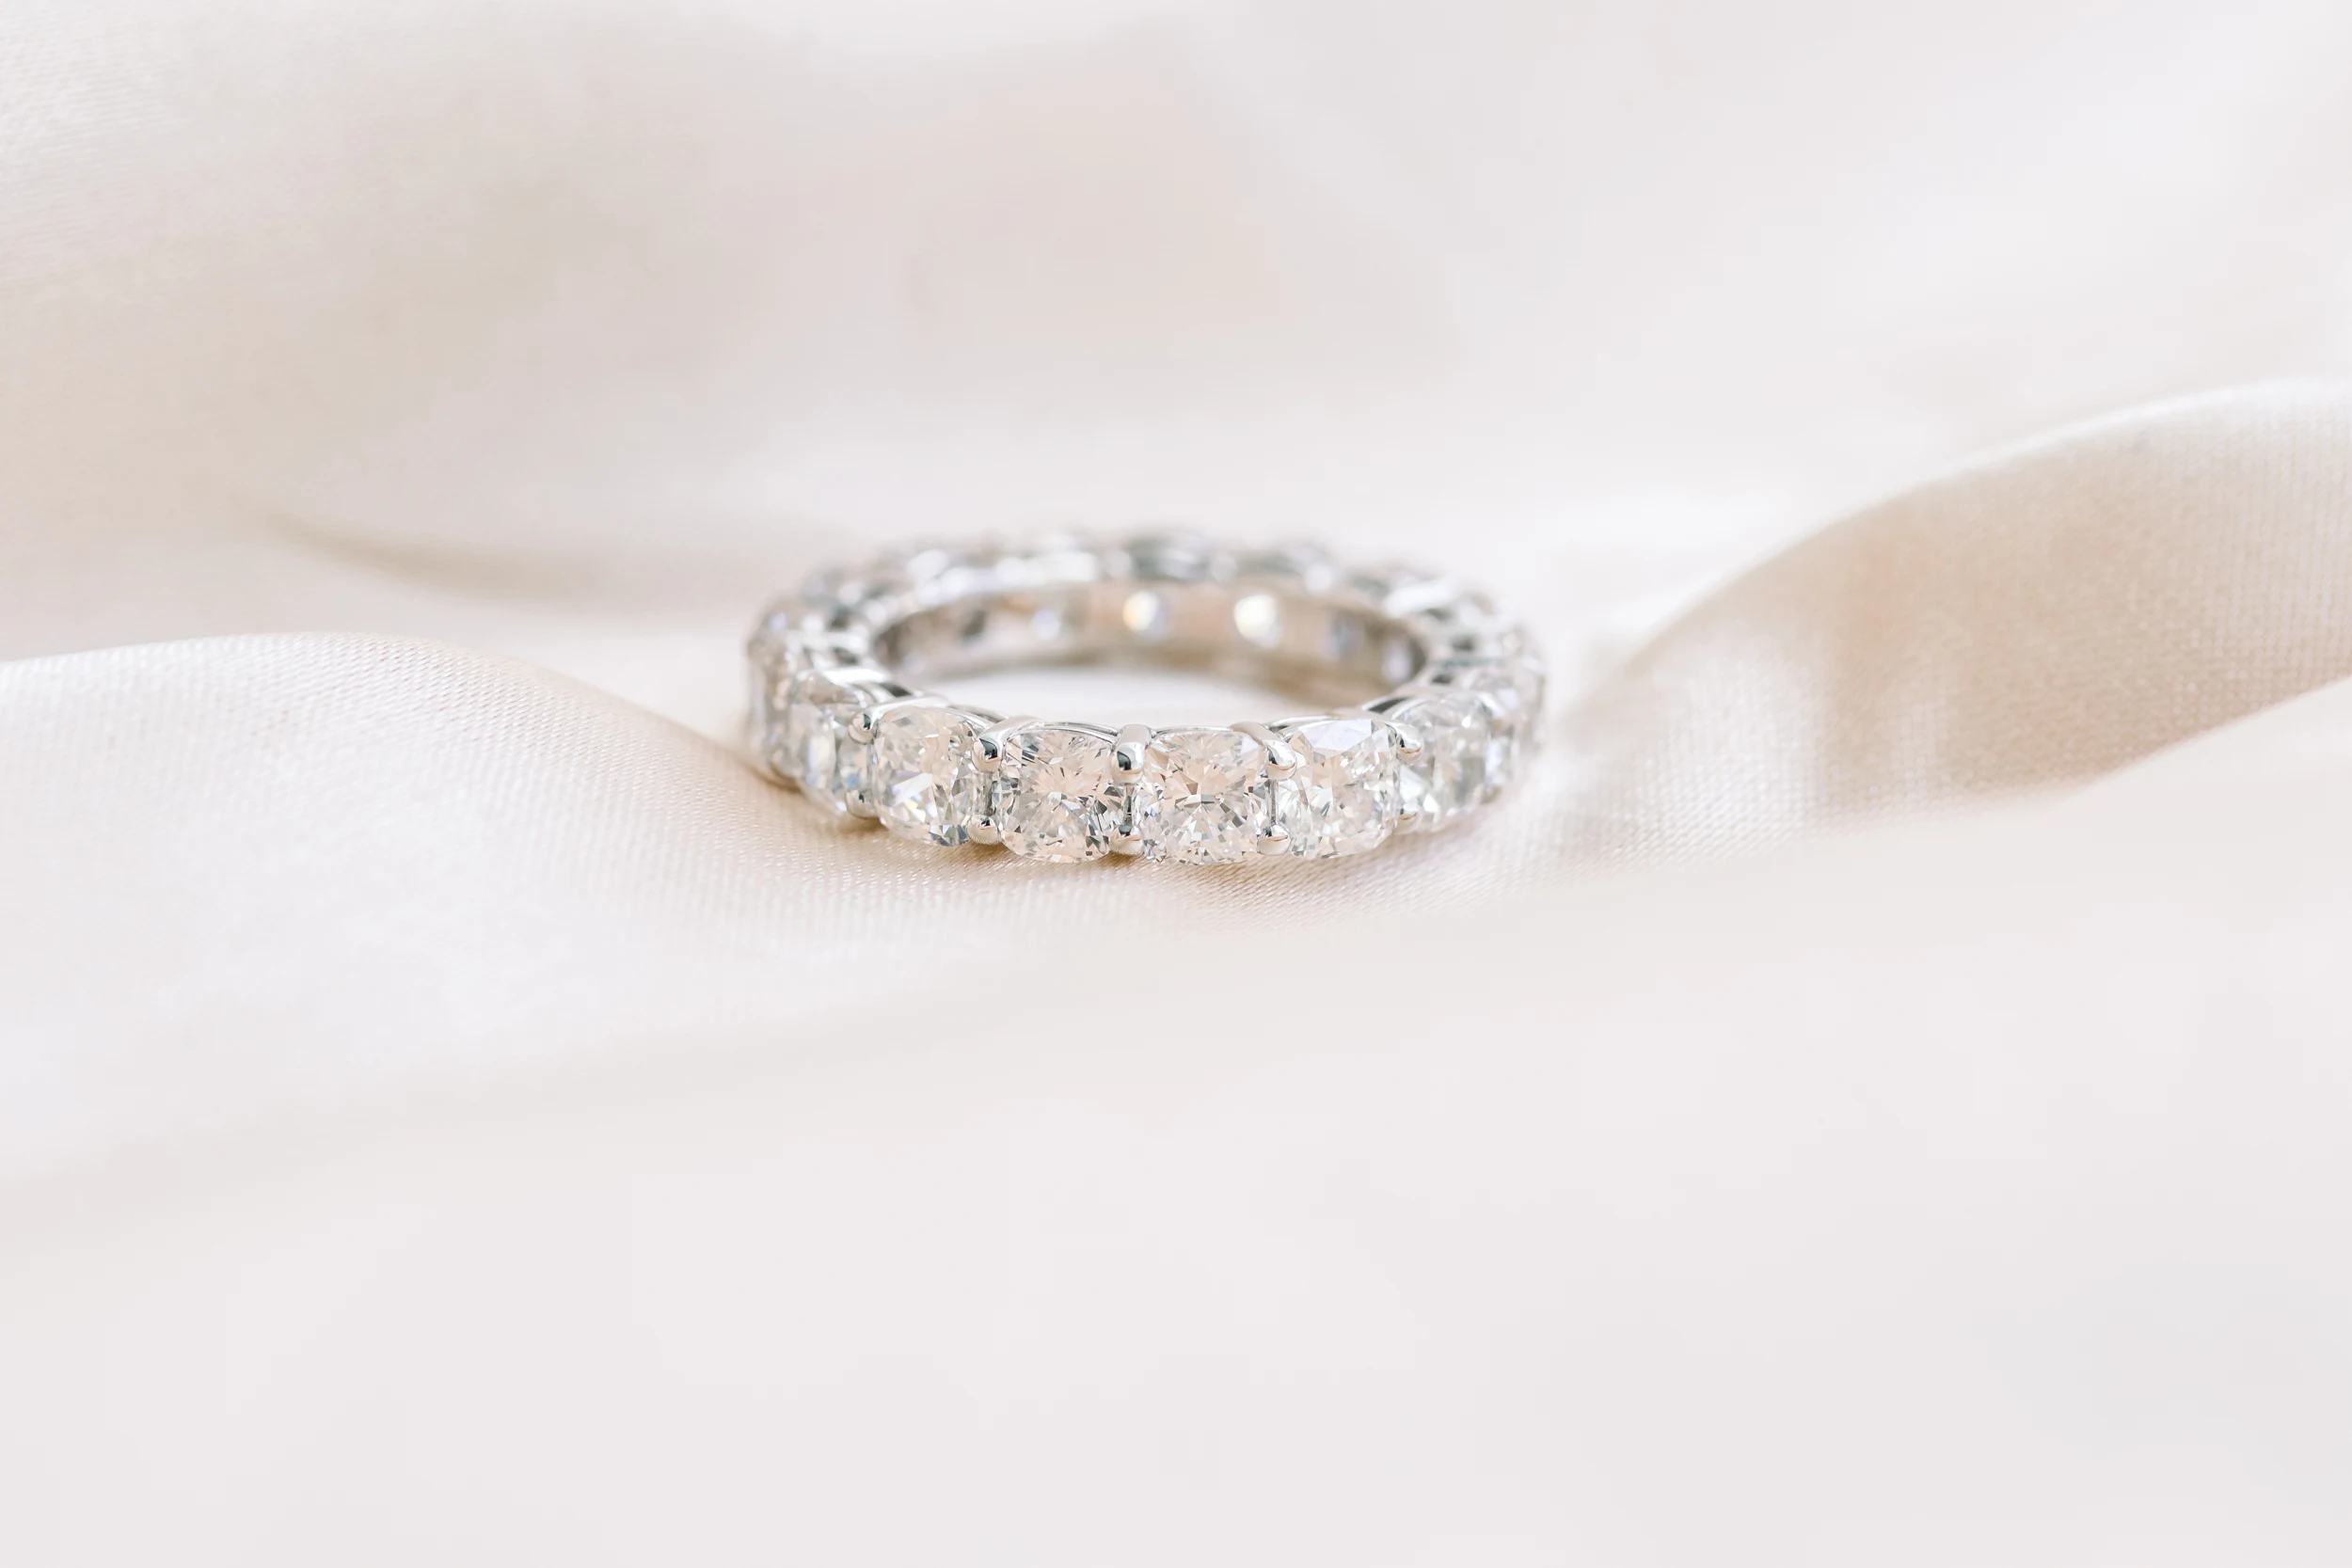 Cushion Eternity Band featuring Hand Selected Diamonds